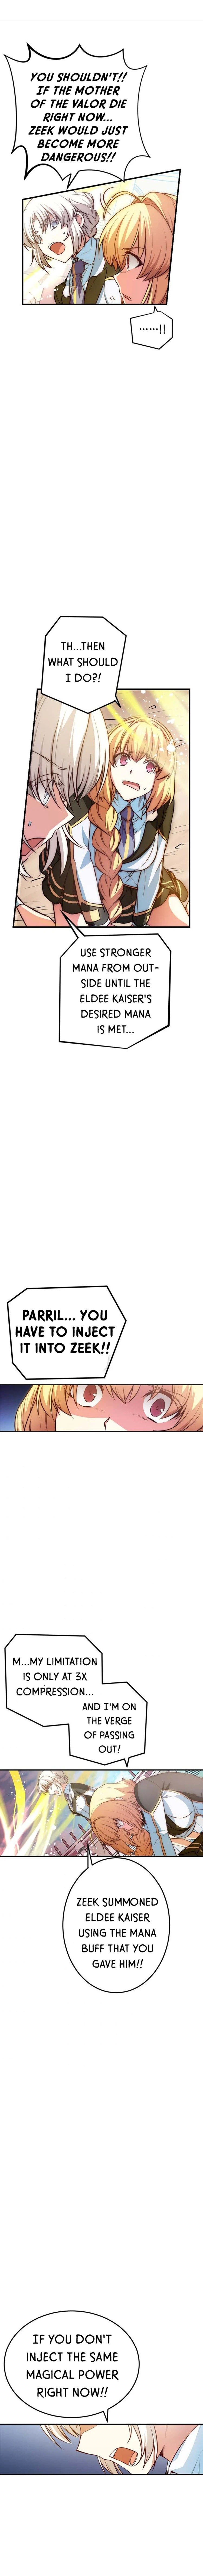 Circle Zero's Otherworldly Hero Business Chapter 71 page 7